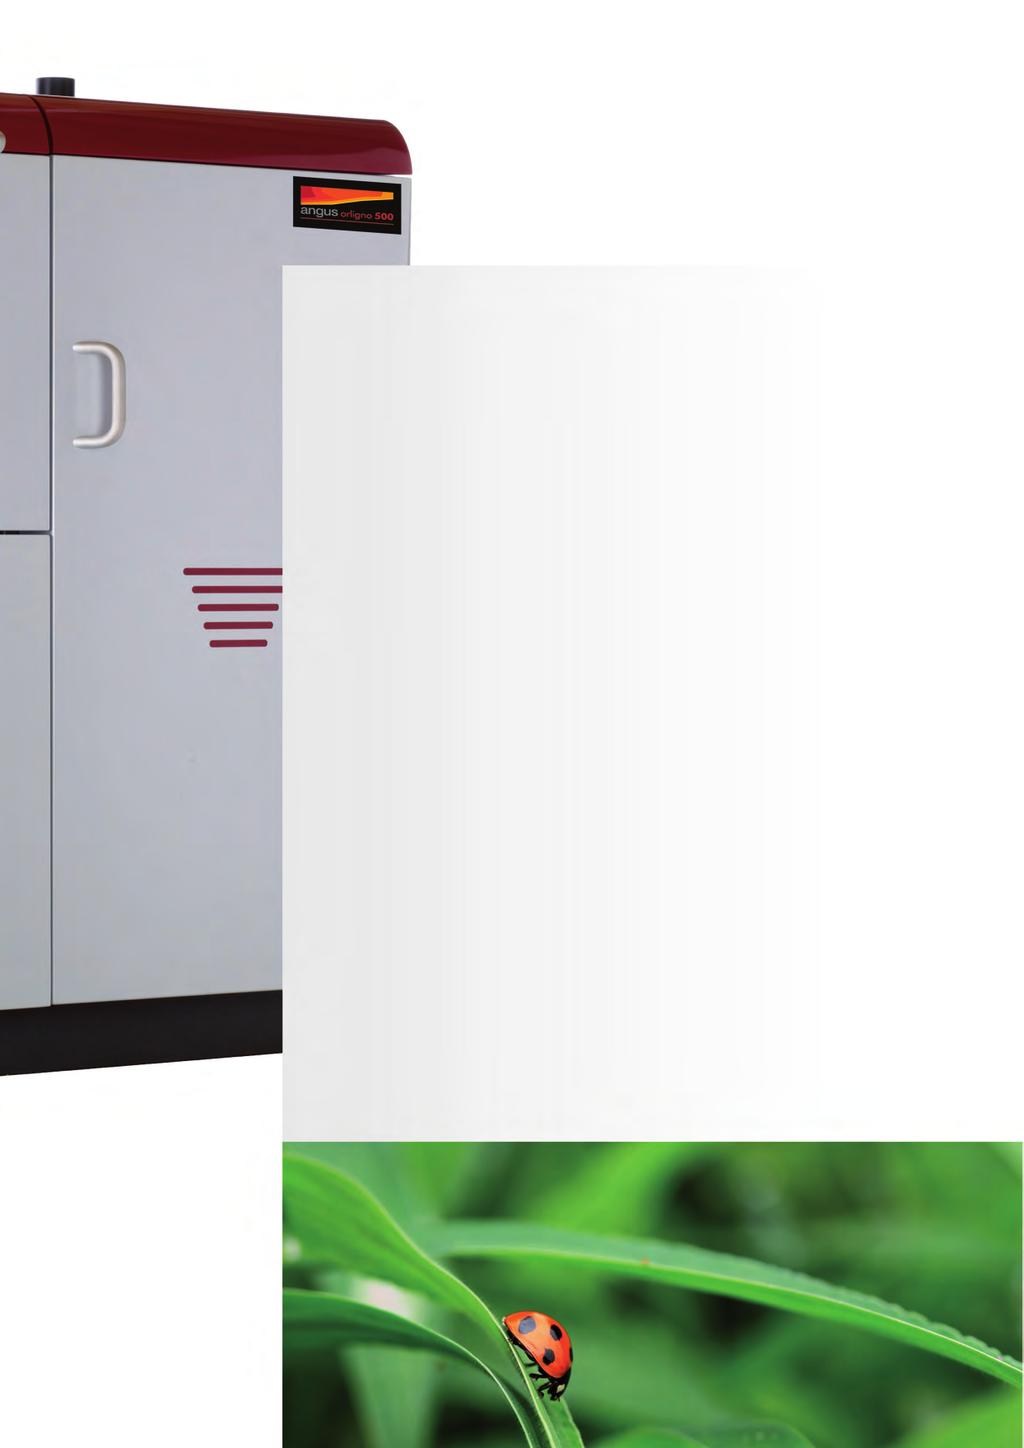 Contents 3 Our product philosophy 3 Our approach 3 Manufacturing credentials 4 Orligno 400 4 Boiler construction 5 Boiler description 5 Burner 6 Technical data 6